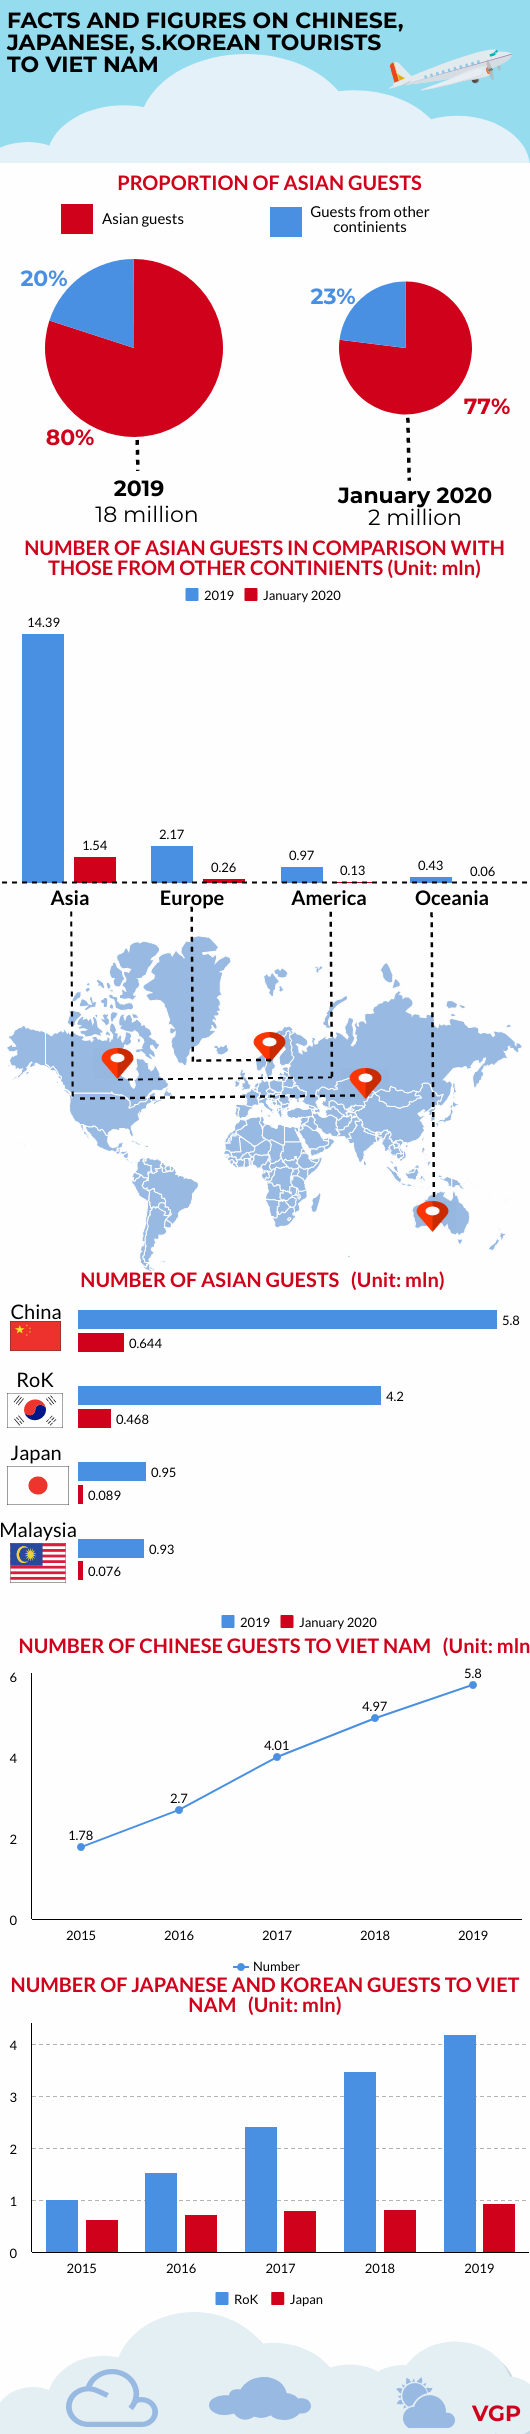 infographic facts and figures on asian tourists to vietnam